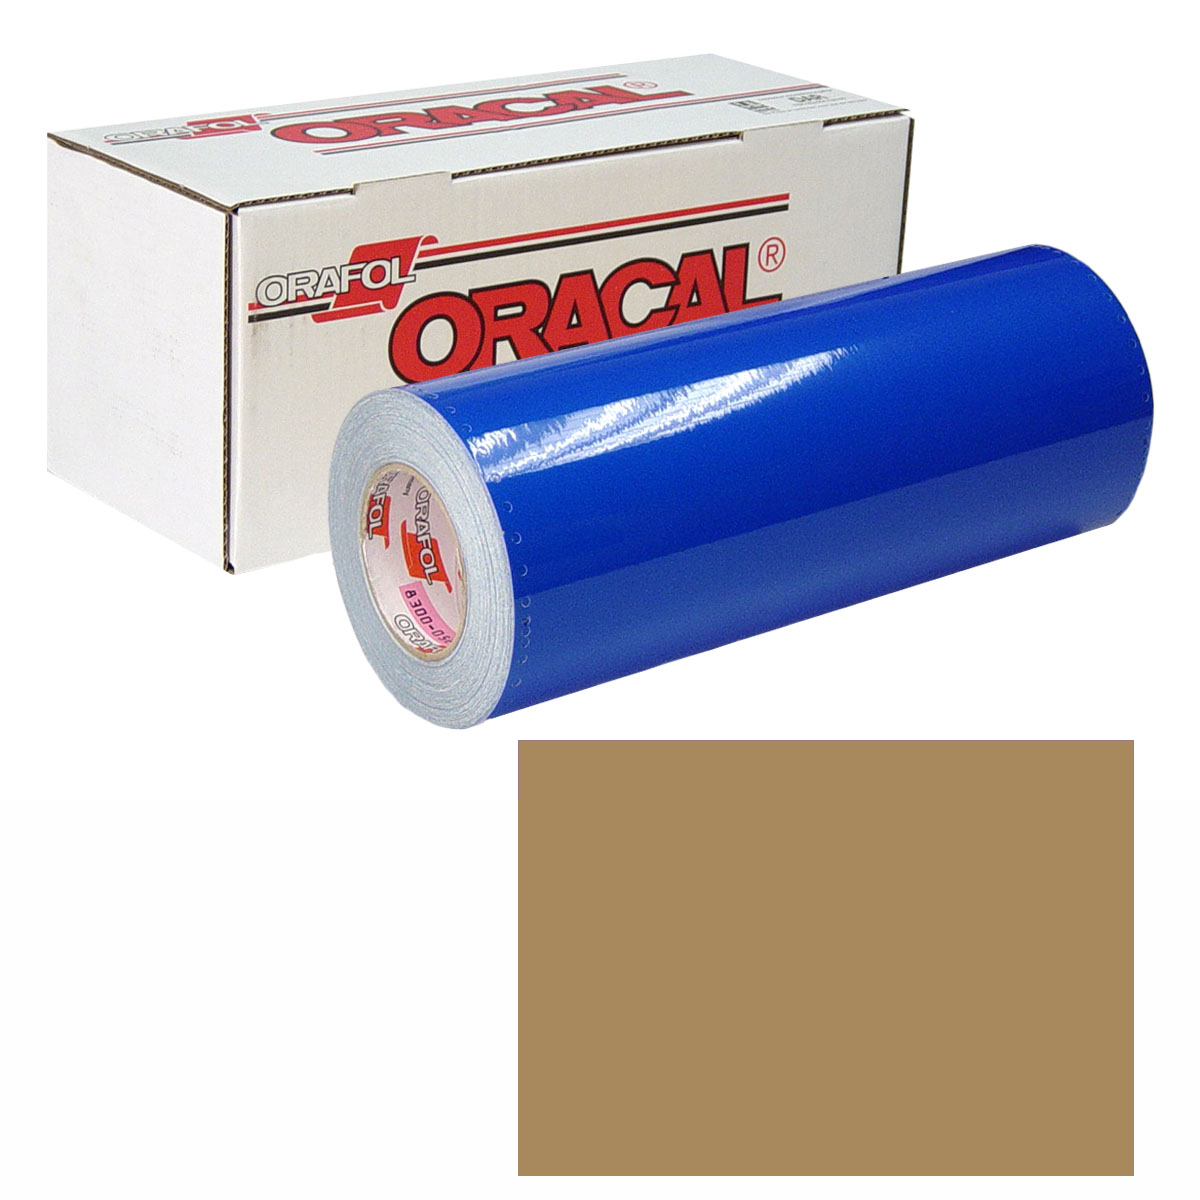 ORACAL 631 15in X 10yd 081 Light Brown